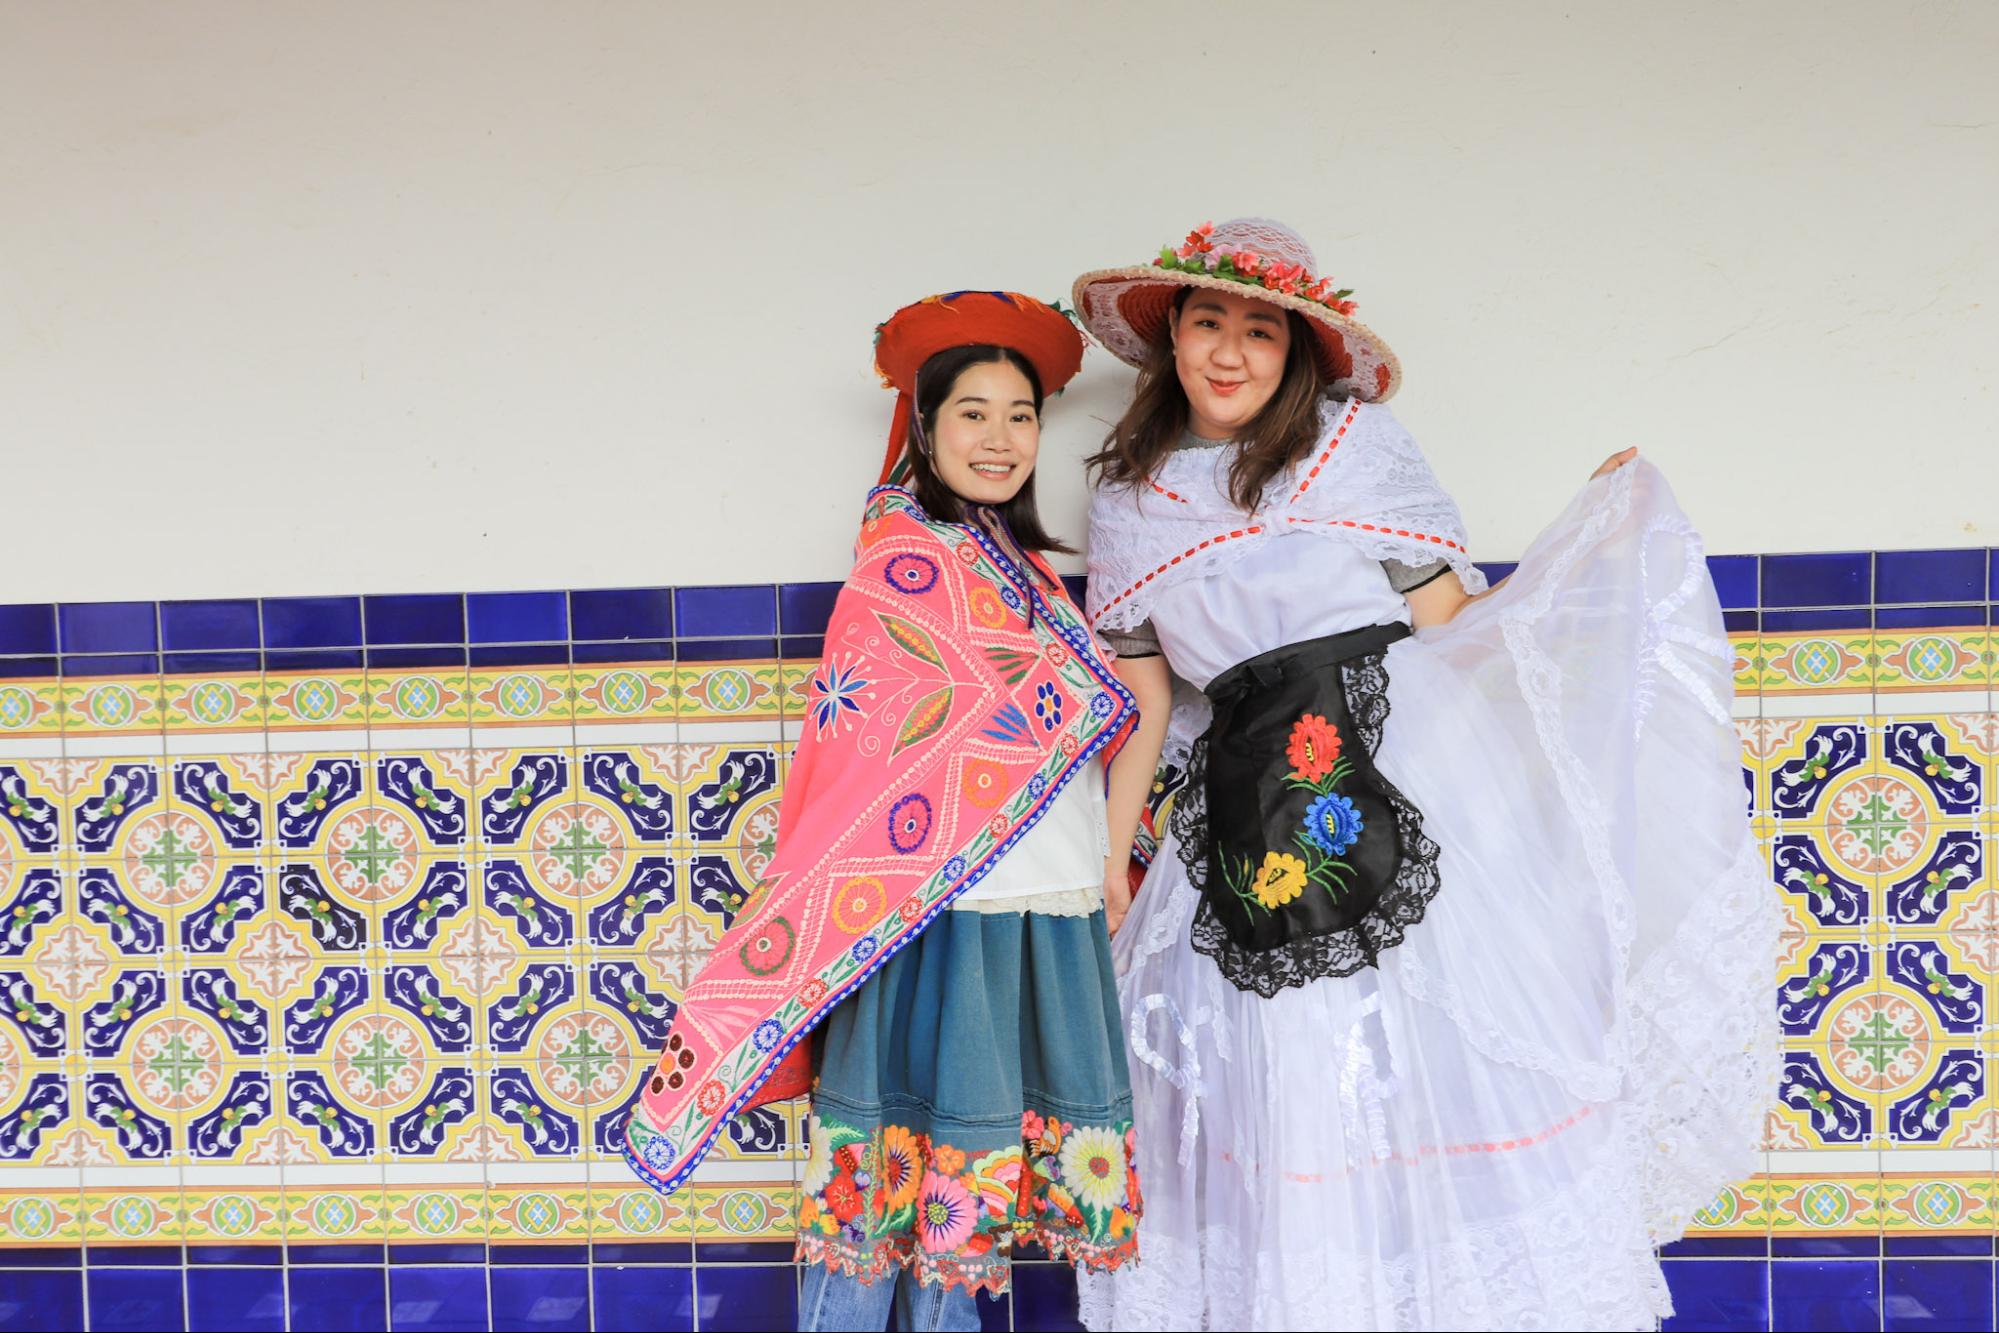 Experience Ethnic Costumes from 8 Different Countries at the Little World!